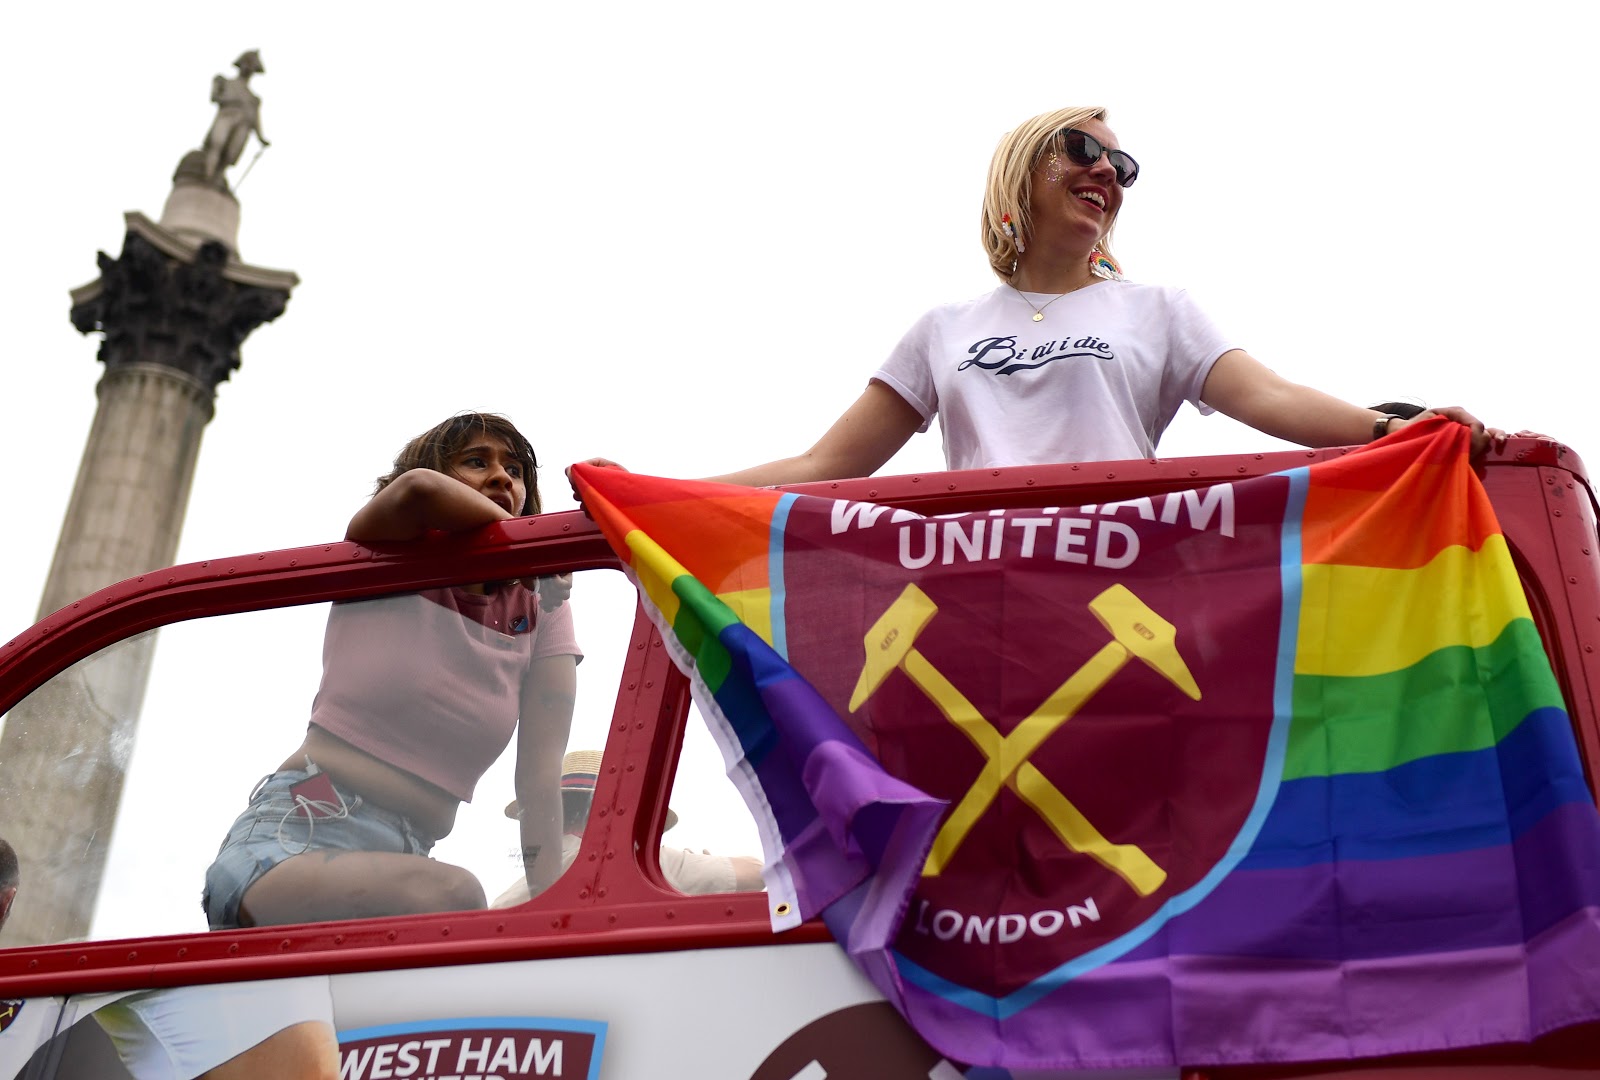 Pride supporters holding a LGBT pride flag on a bus in London.